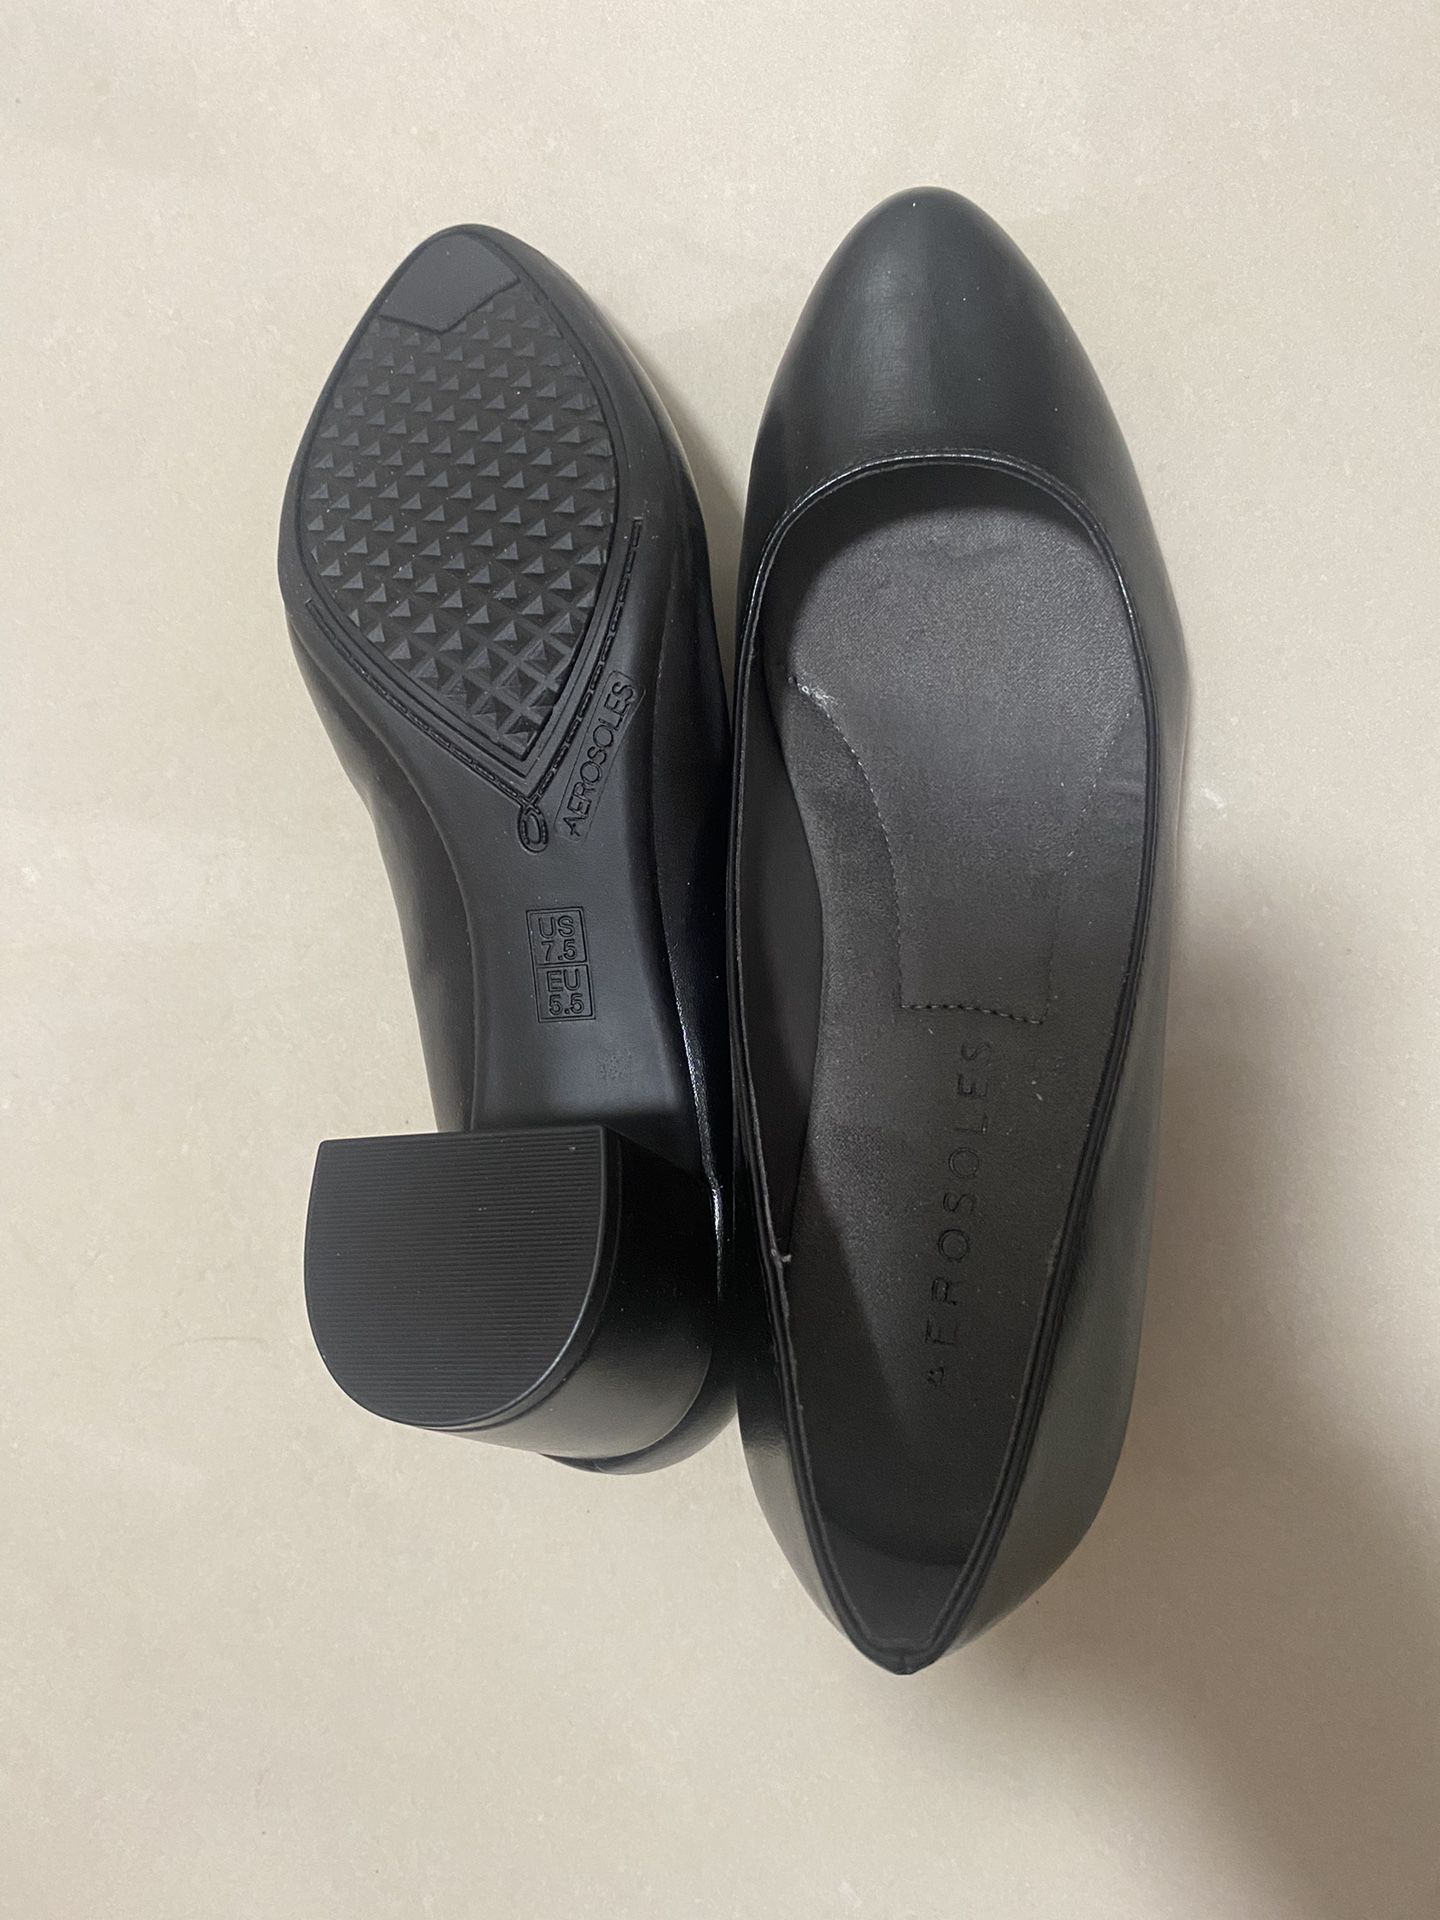 High Quality Aero soles Heel Shoes High quality comfortable 7.5 wide ( please check my other stuff more than 200 items)